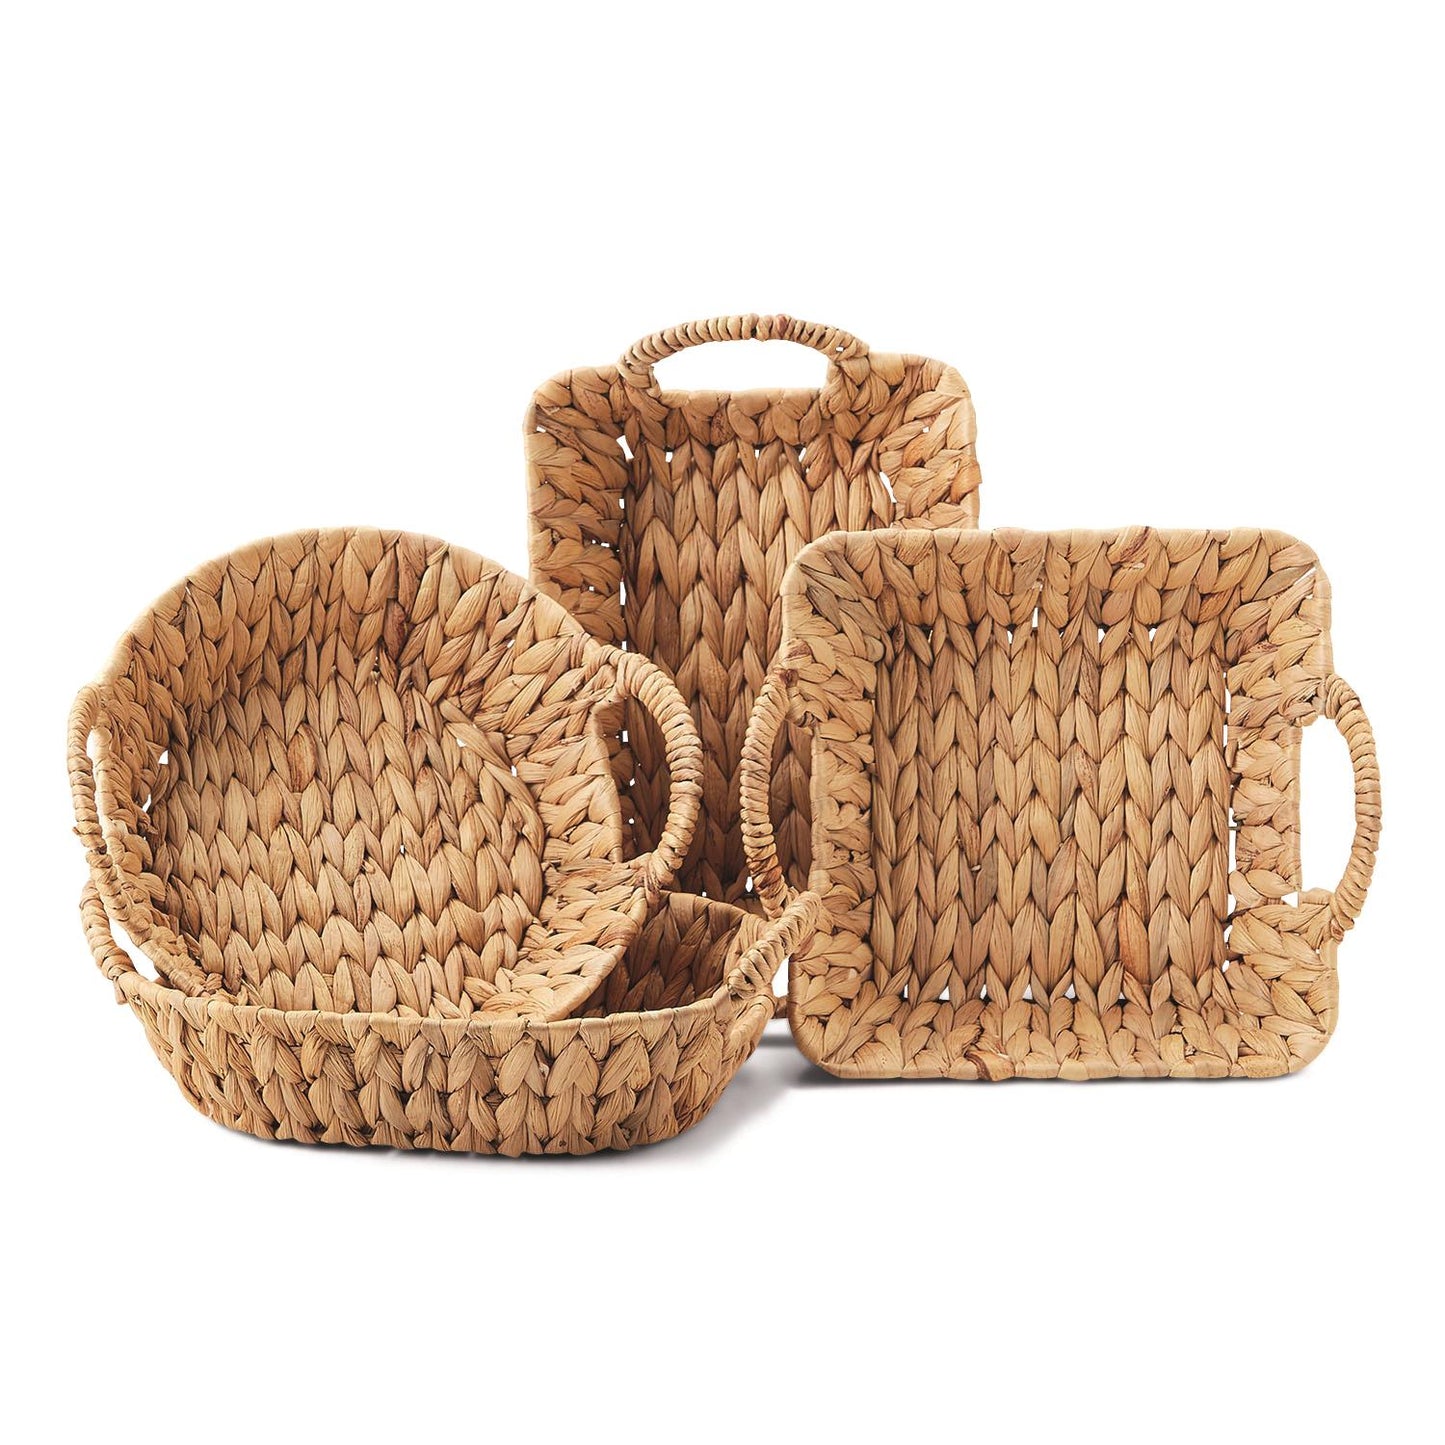 Baskets- Hand-Crafted Handled Water Hyacinth Baskets